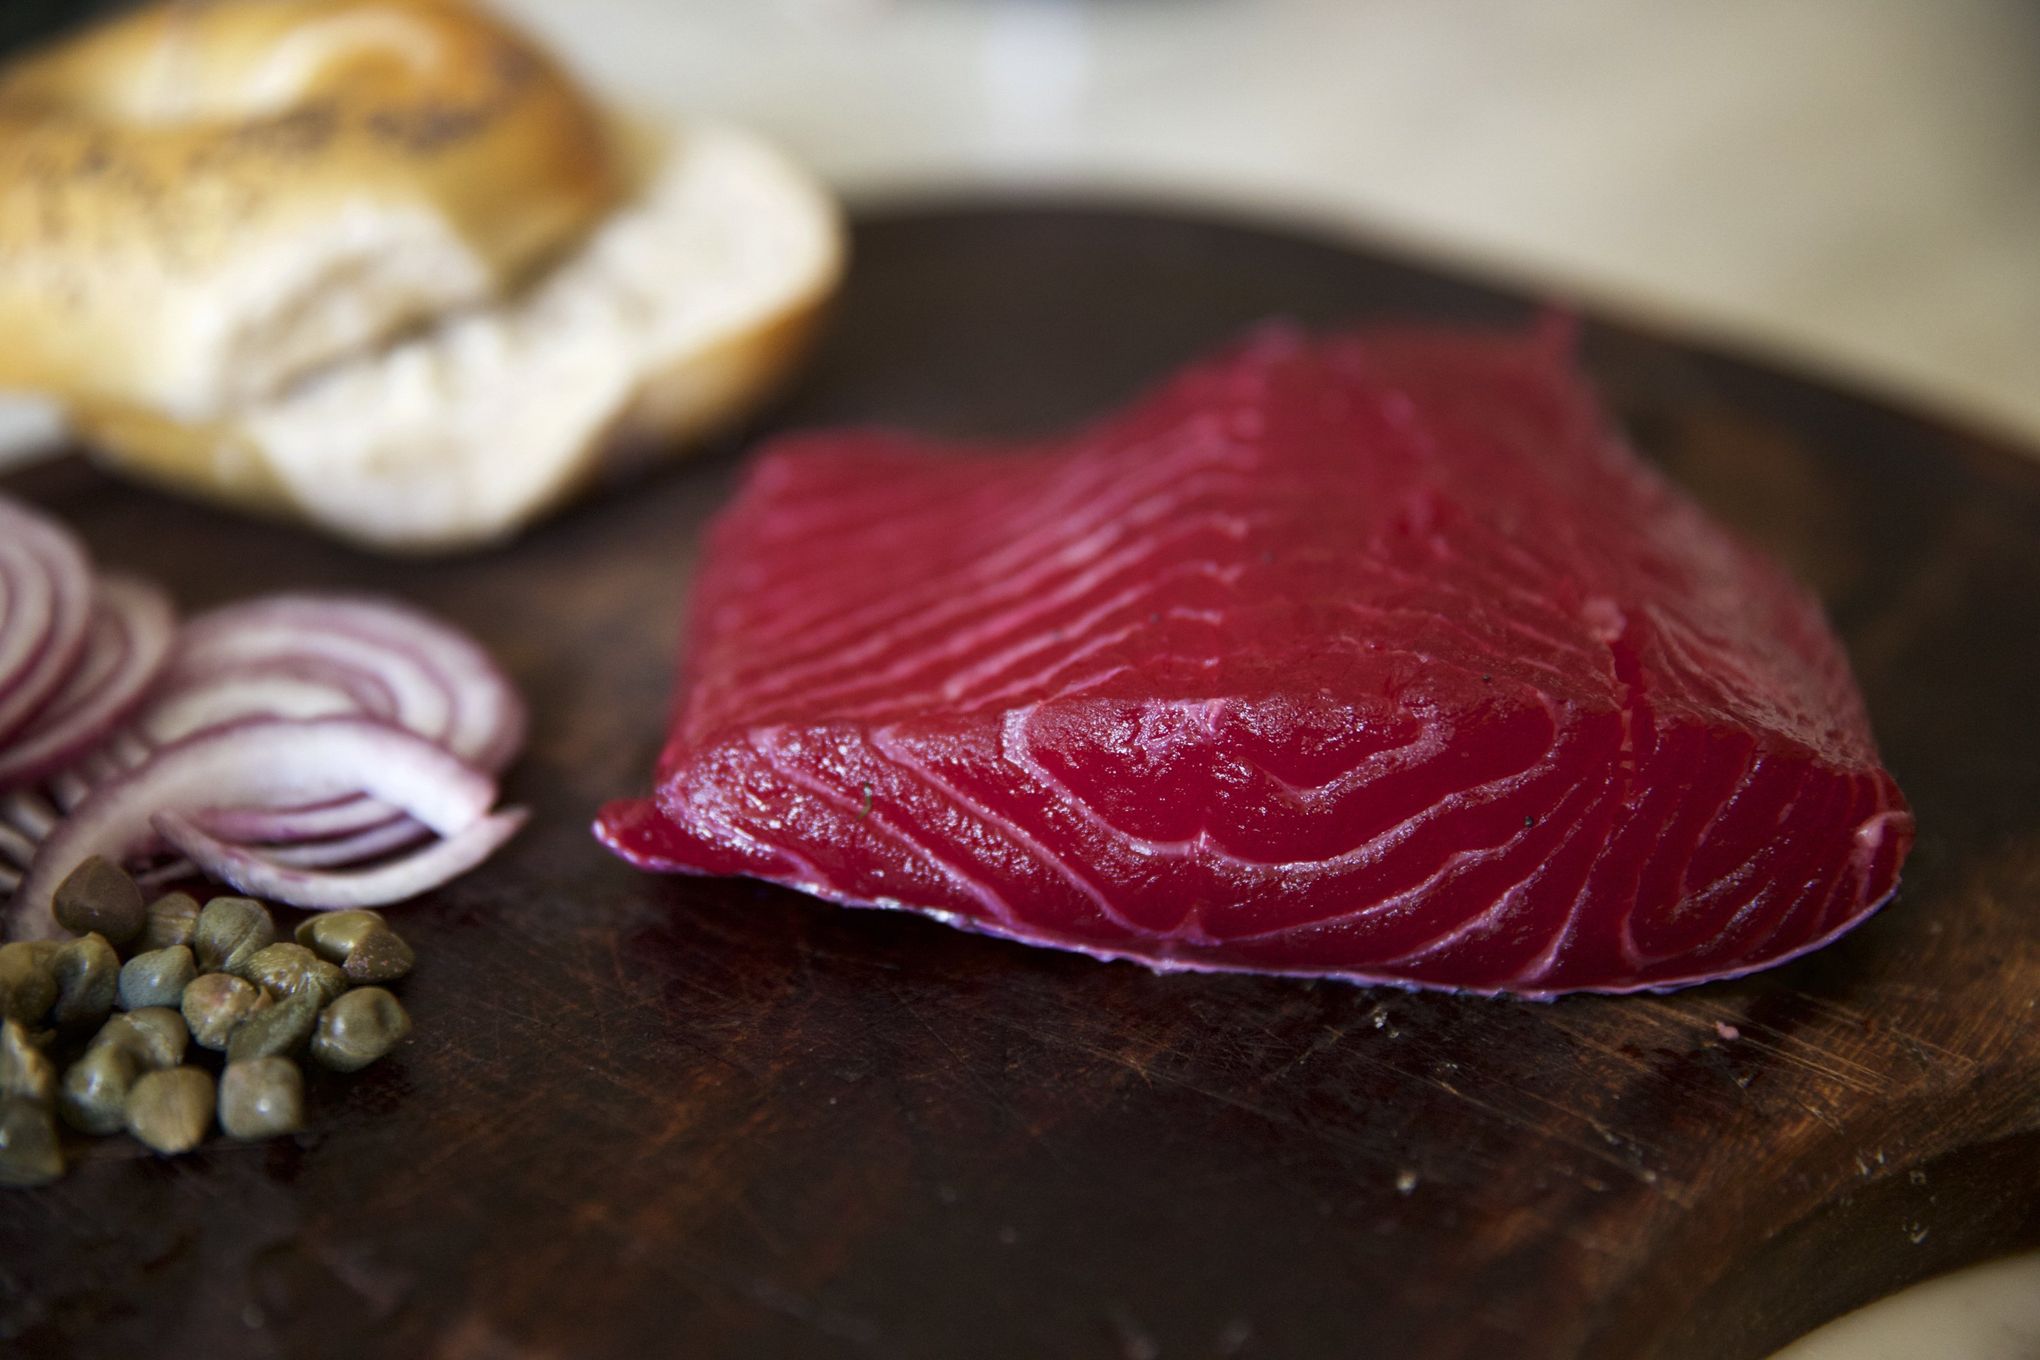 Curing meat and fish at home: Just add salt